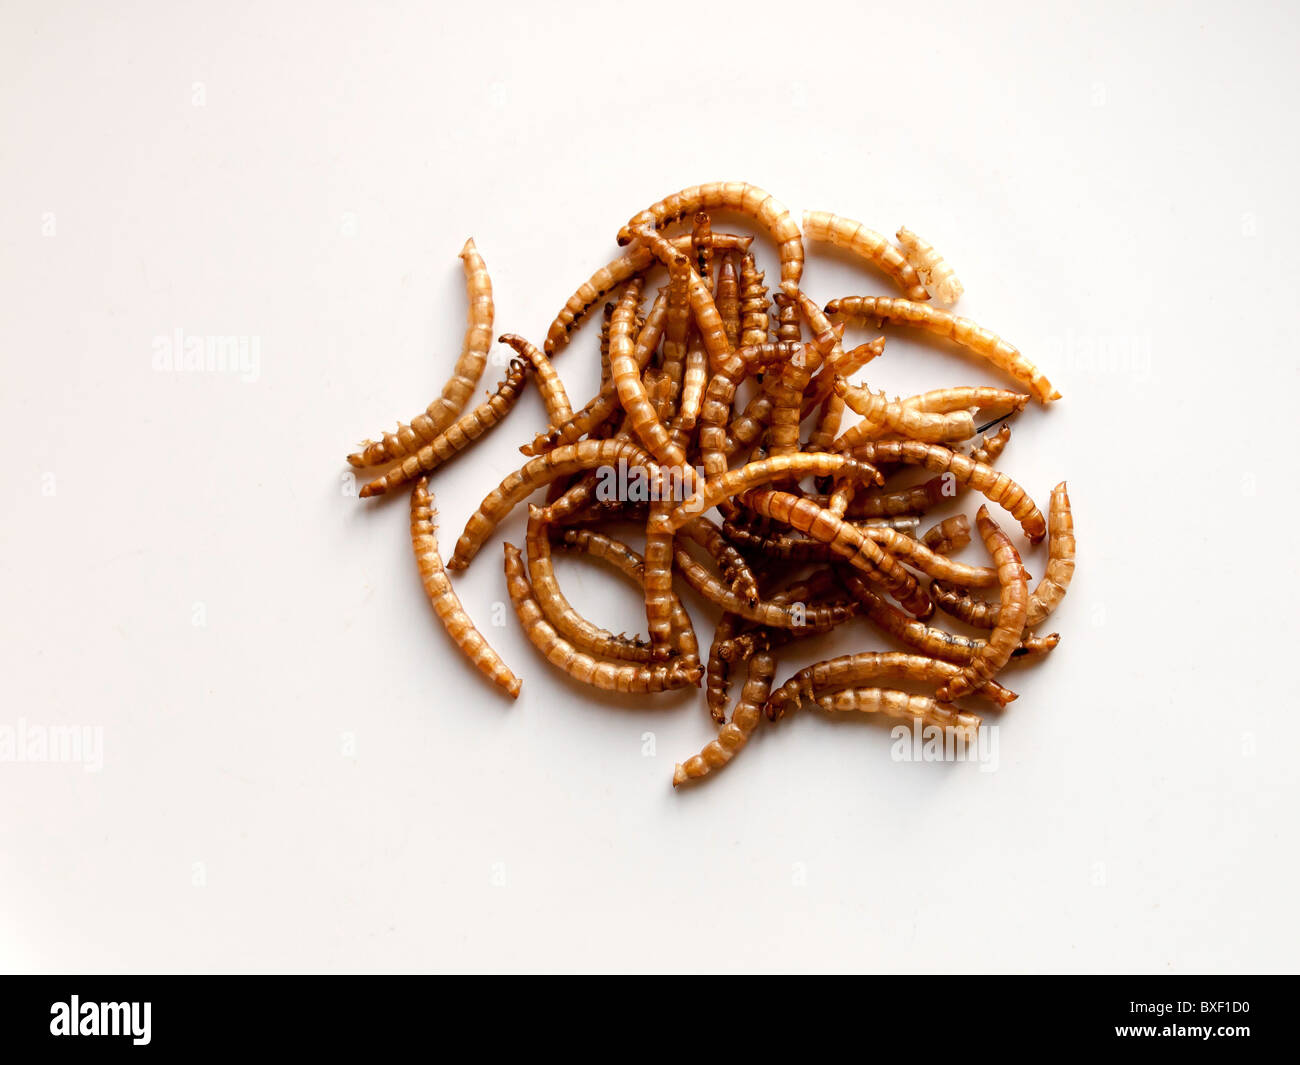 Dried meal worms, the larva form of the mealworm beetle Tenebrio molitor, food for wild garden birds Stock Photo